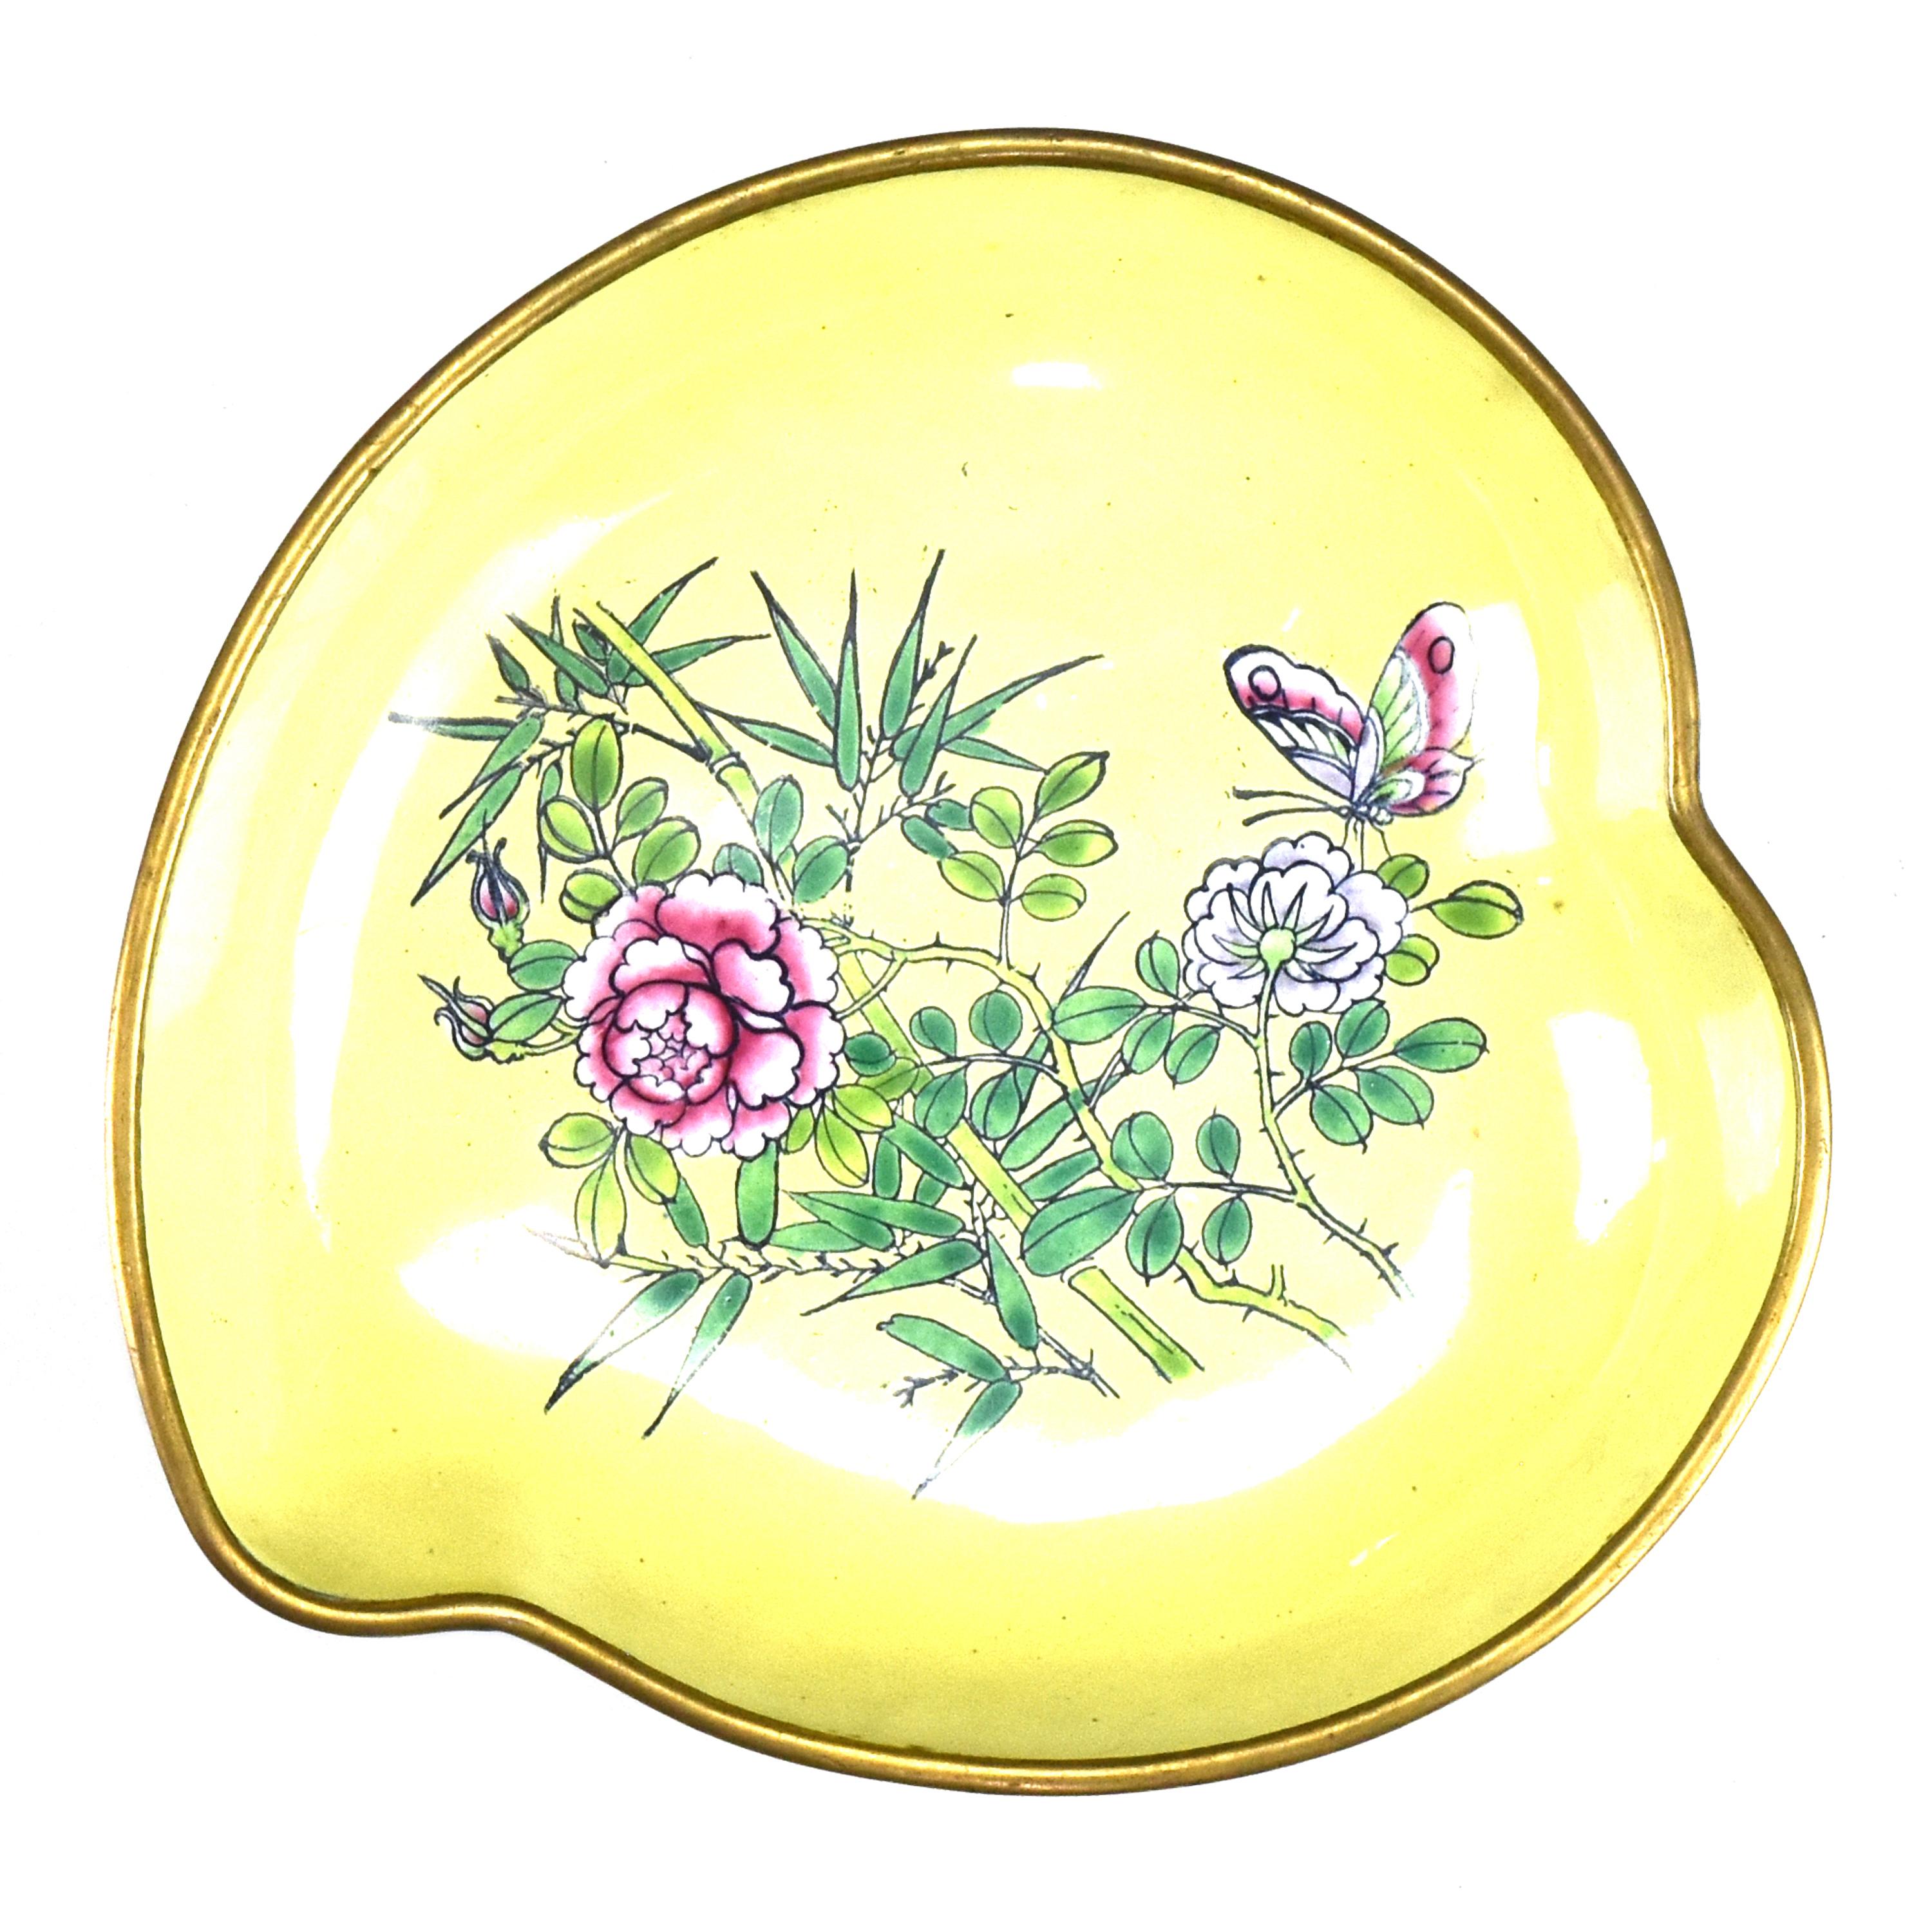 Antique Chinese Canton enamel peach shaped dish decorated with bamboo, roses and a butterfly on a yellow ground dating to the Qing period around 1860.